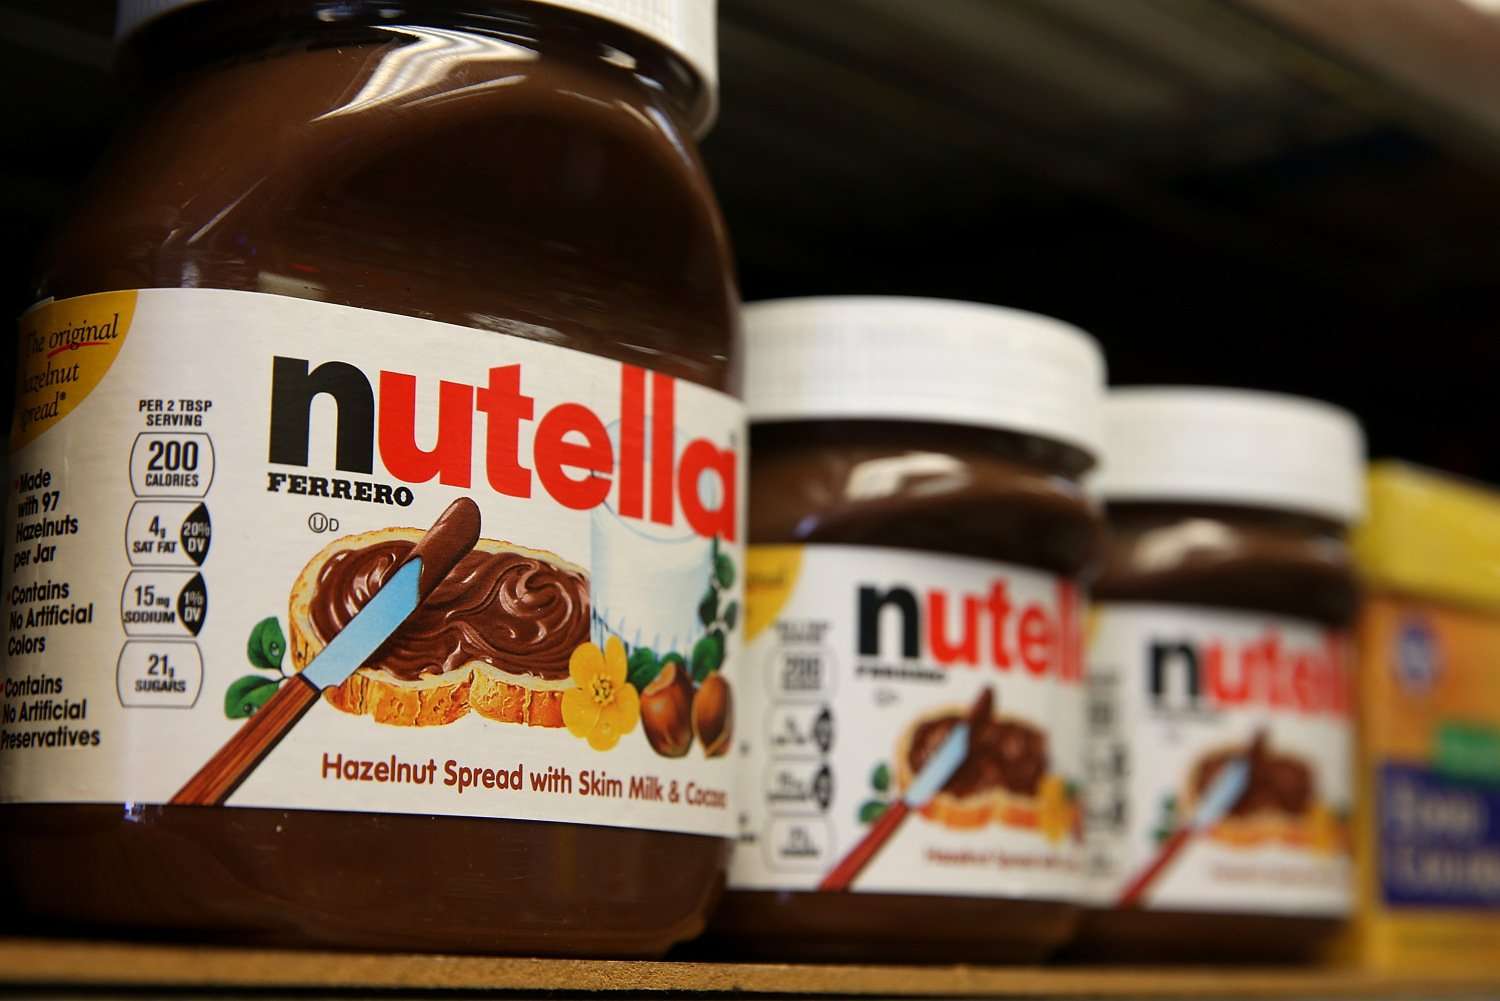 image for 20 Tons Of Nutella Stolen From Truck In Germany